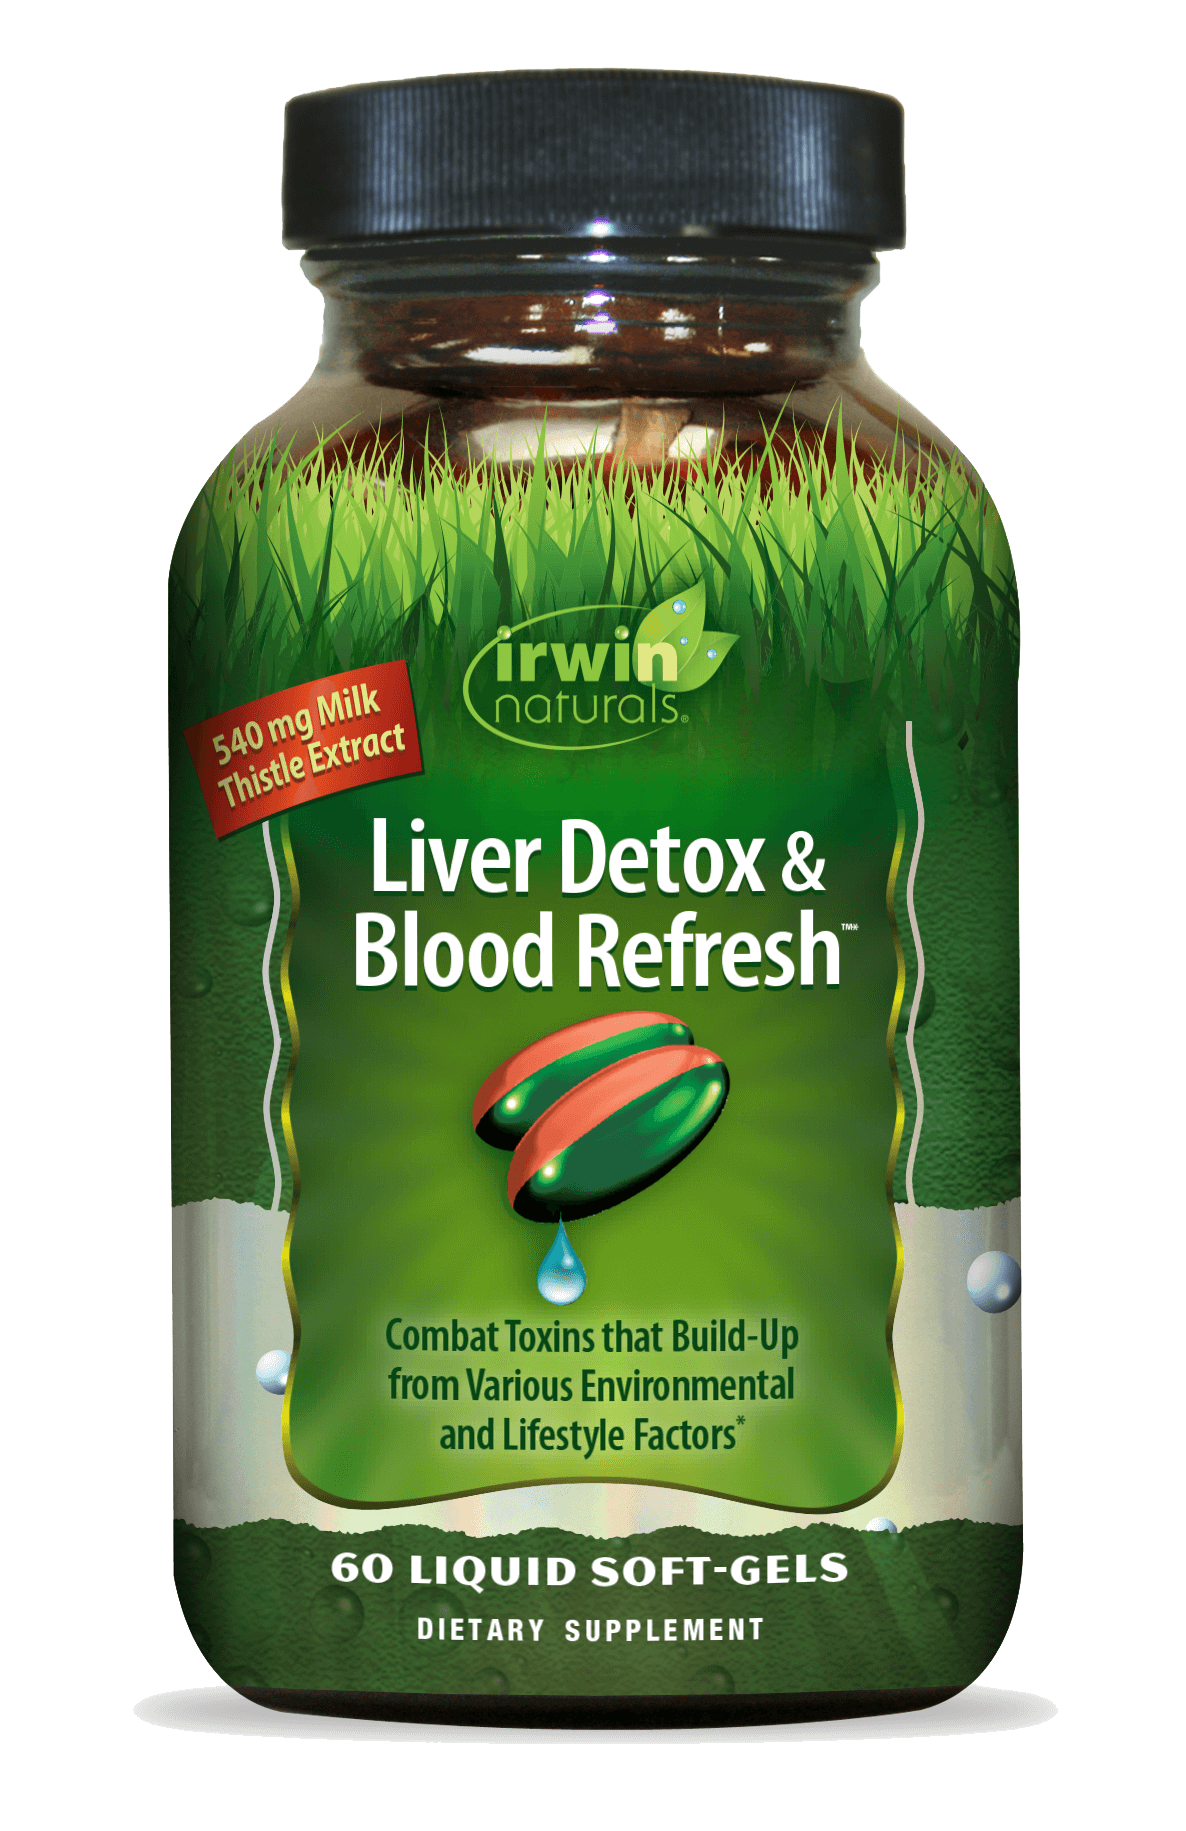 Liver Detox and Blood Refresh by Irwin Naturals